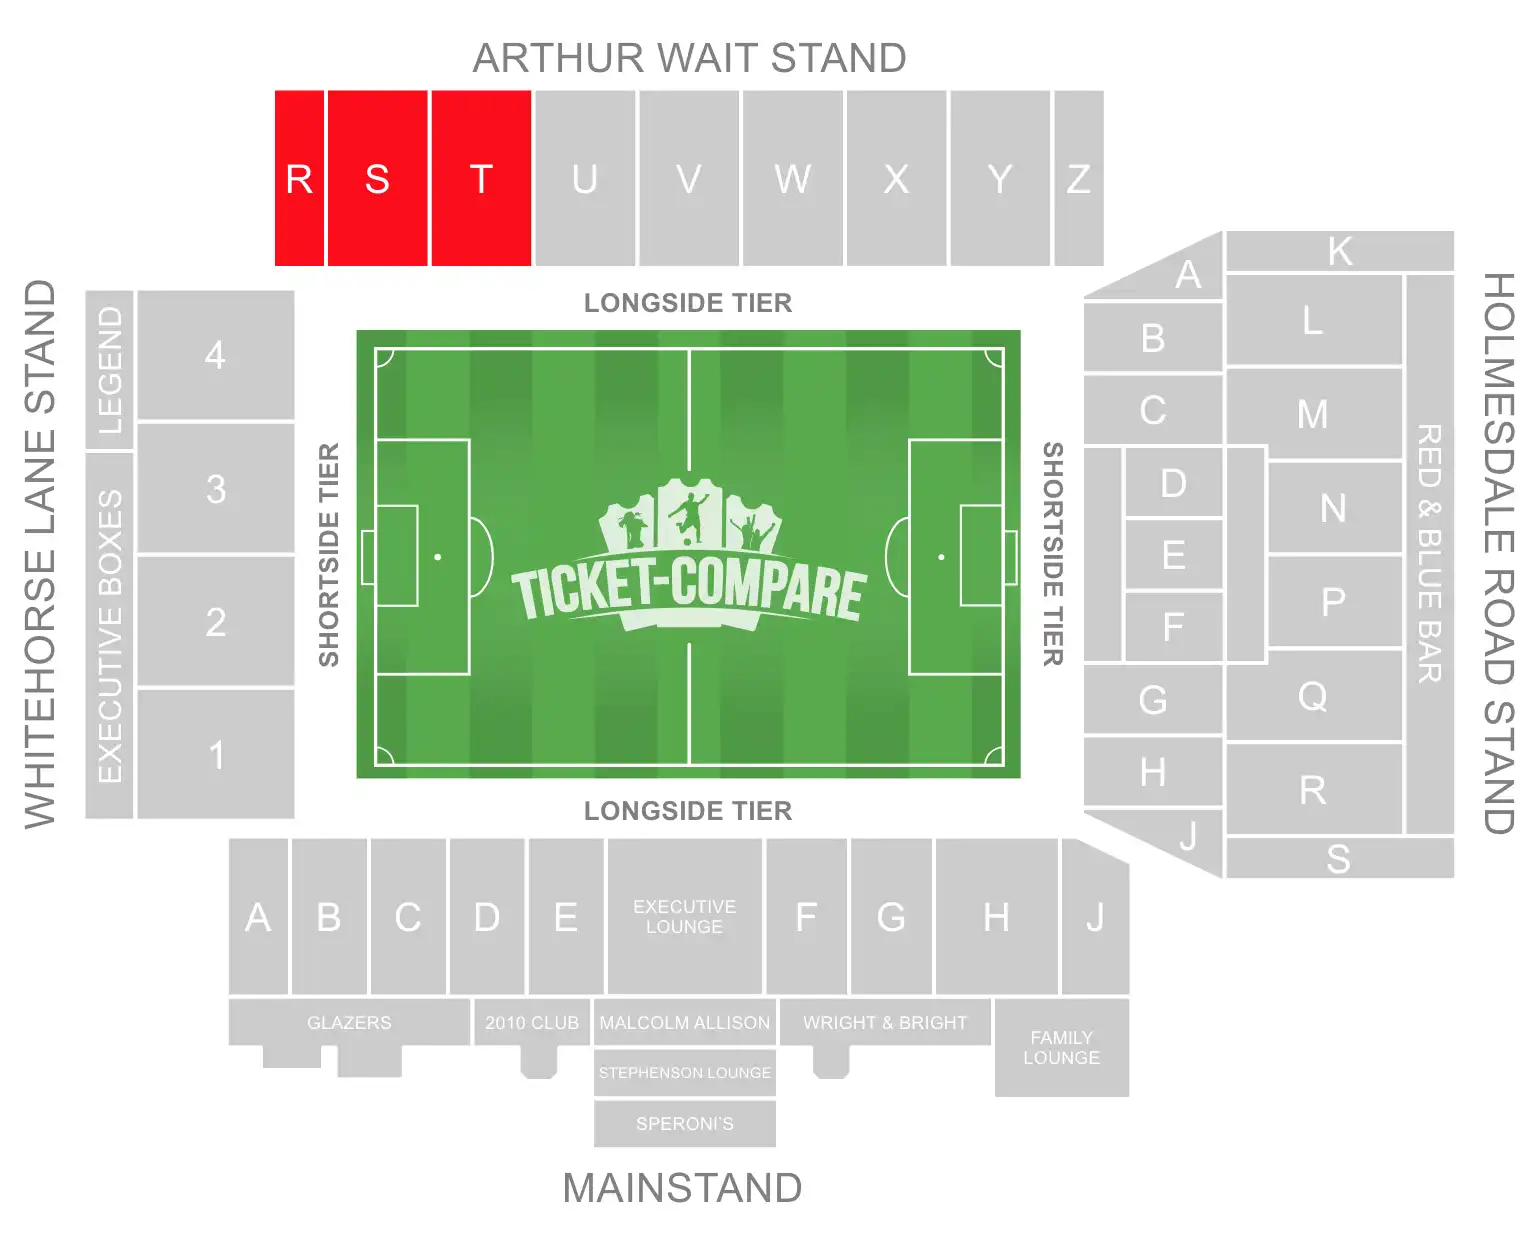 Selhurst Park seating plan Away sections highligted